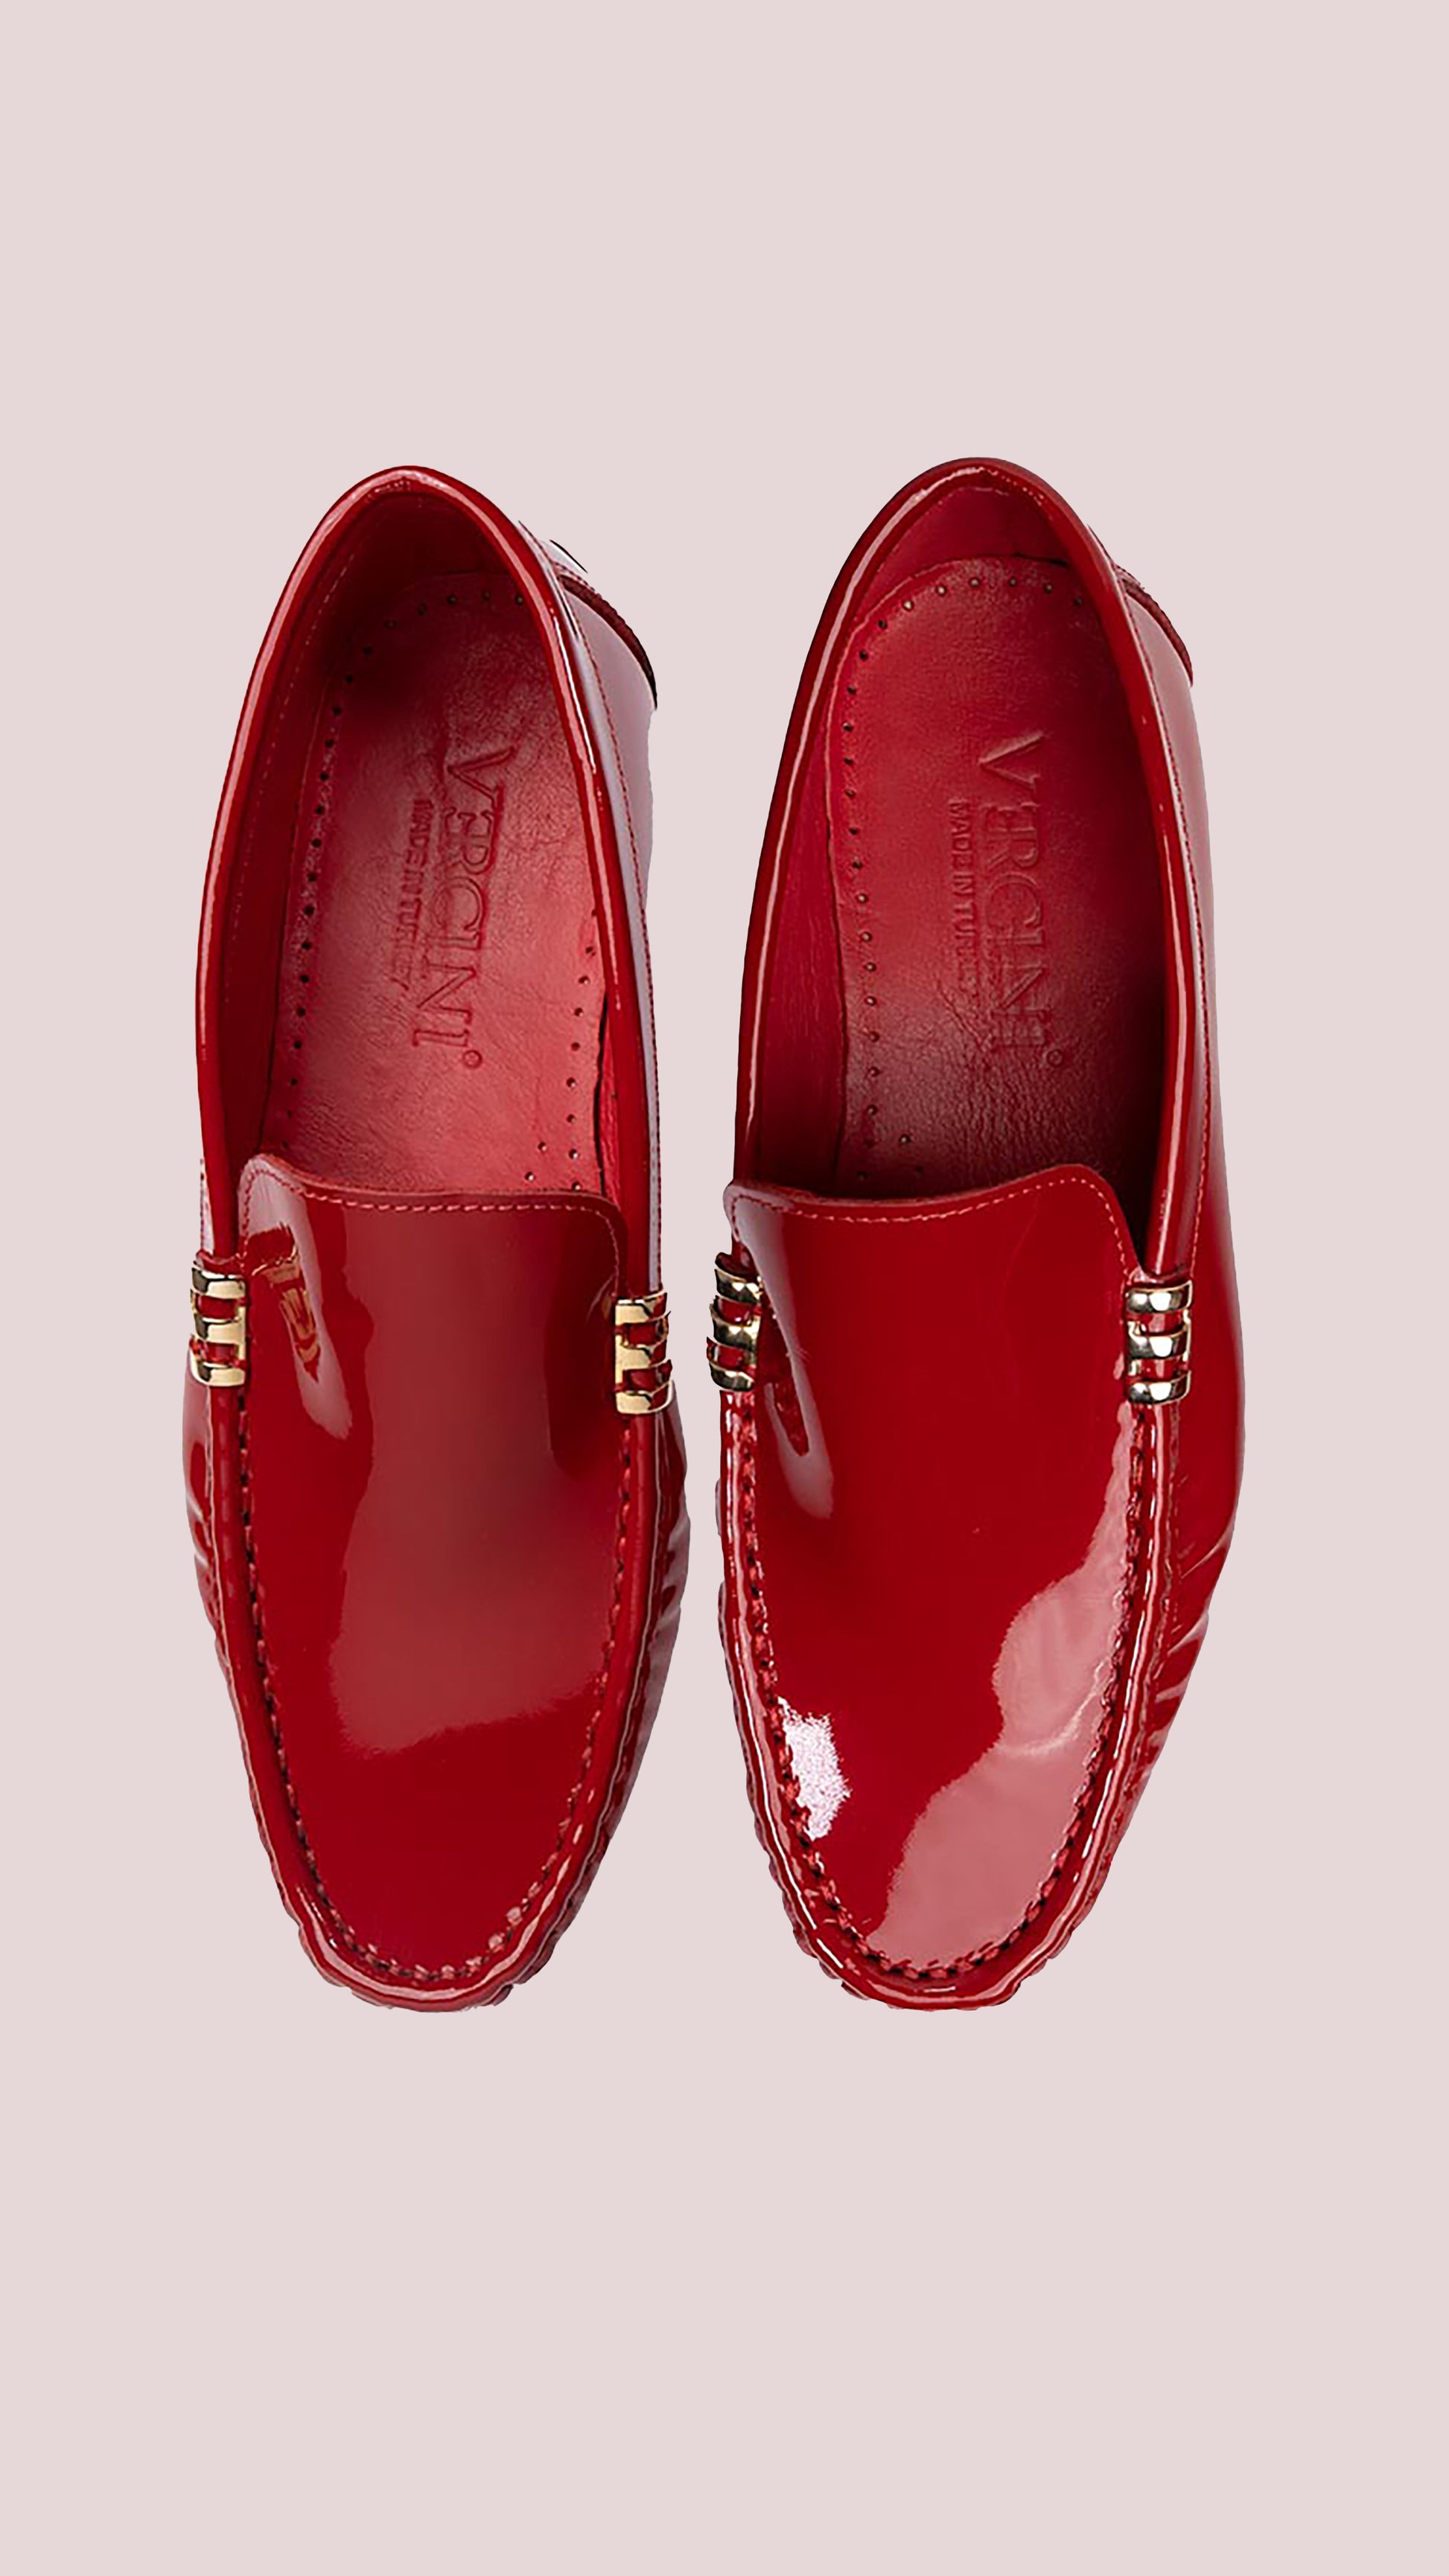 Vercini Luxe Patent Leather Loafers SHOES Shoe Collection Vercini